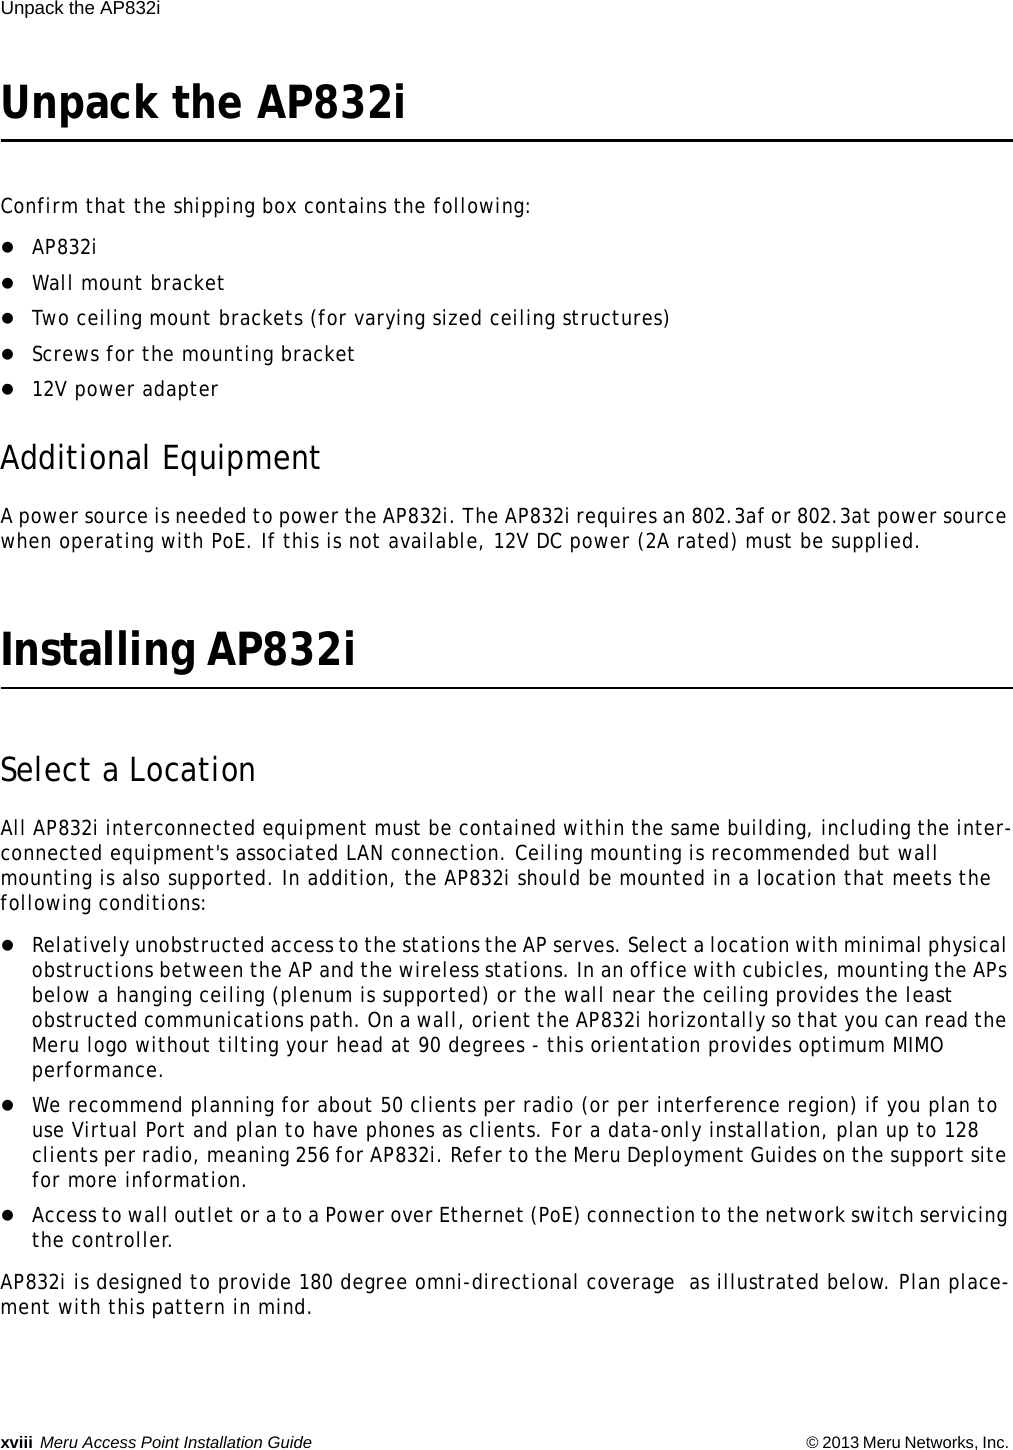 xviii Meru Access Point Installation Guide © 2013 Meru Networks, Inc. Unpack the AP832i Unpack the AP832iConfirm that the shipping box contains the following:AP832iWall mount bracketTwo ceiling mount brackets (for varying sized ceiling structures)Screws for the mounting bracket12V power adapterAdditional EquipmentA power source is needed to power the AP832i. The AP832i requires an 802.3af or 802.3at power source when operating with PoE. If this is not available, 12V DC power (2A rated) must be supplied.Installing AP832iSelect a LocationAll AP832i interconnected equipment must be contained within the same building, including the inter-connected equipment&apos;s associated LAN connection. Ceiling mounting is recommended but wall mounting is also supported. In addition, the AP832i should be mounted in a location that meets the following conditions:Relatively unobstructed access to the stations the AP serves. Select a location with minimal physical obstructions between the AP and the wireless stations. In an office with cubicles, mounting the APs below a hanging ceiling (plenum is supported) or the wall near the ceiling provides the least obstructed communications path. On a wall, orient the AP832i horizontally so that you can read the Meru logo without tilting your head at 90 degrees - this orientation provides optimum MIMO performance. We recommend planning for about 50 clients per radio (or per interference region) if you plan to use Virtual Port and plan to have phones as clients. For a data-only installation, plan up to 128 clients per radio, meaning 256 for AP832i. Refer to the Meru Deployment Guides on the support site for more information. Access to wall outlet or a to a Power over Ethernet (PoE) connection to the network switch servicing the controller. AP832i is designed to provide 180 degree omni-directional coverage  as illustrated below. Plan place-ment with this pattern in mind. 